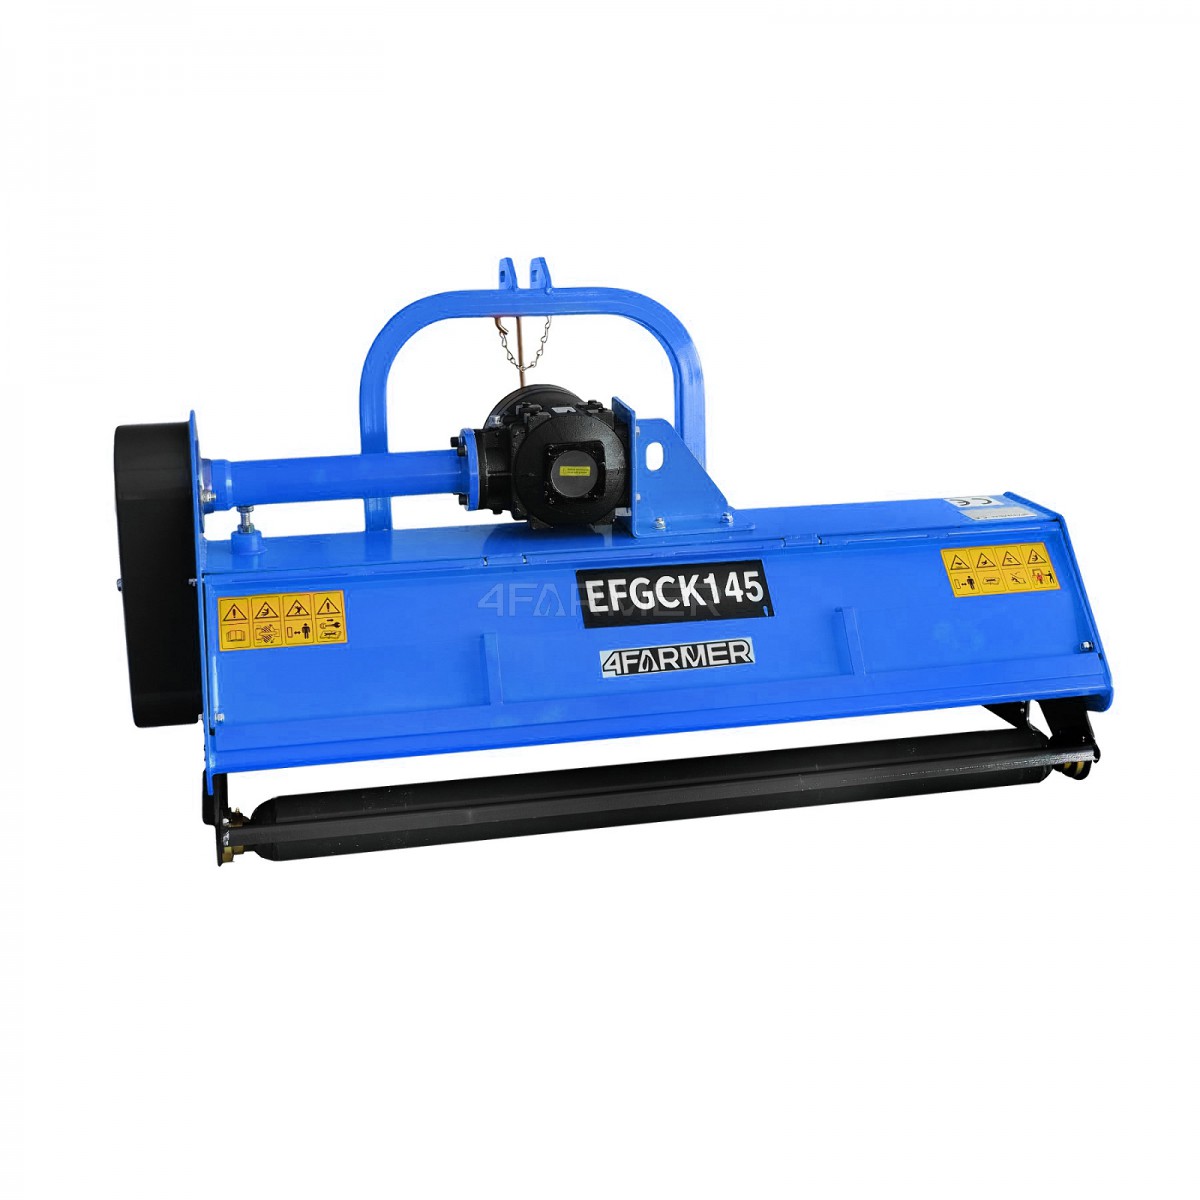 Flail mower EFGC-K 135 with opening flap 4FARMER - blue